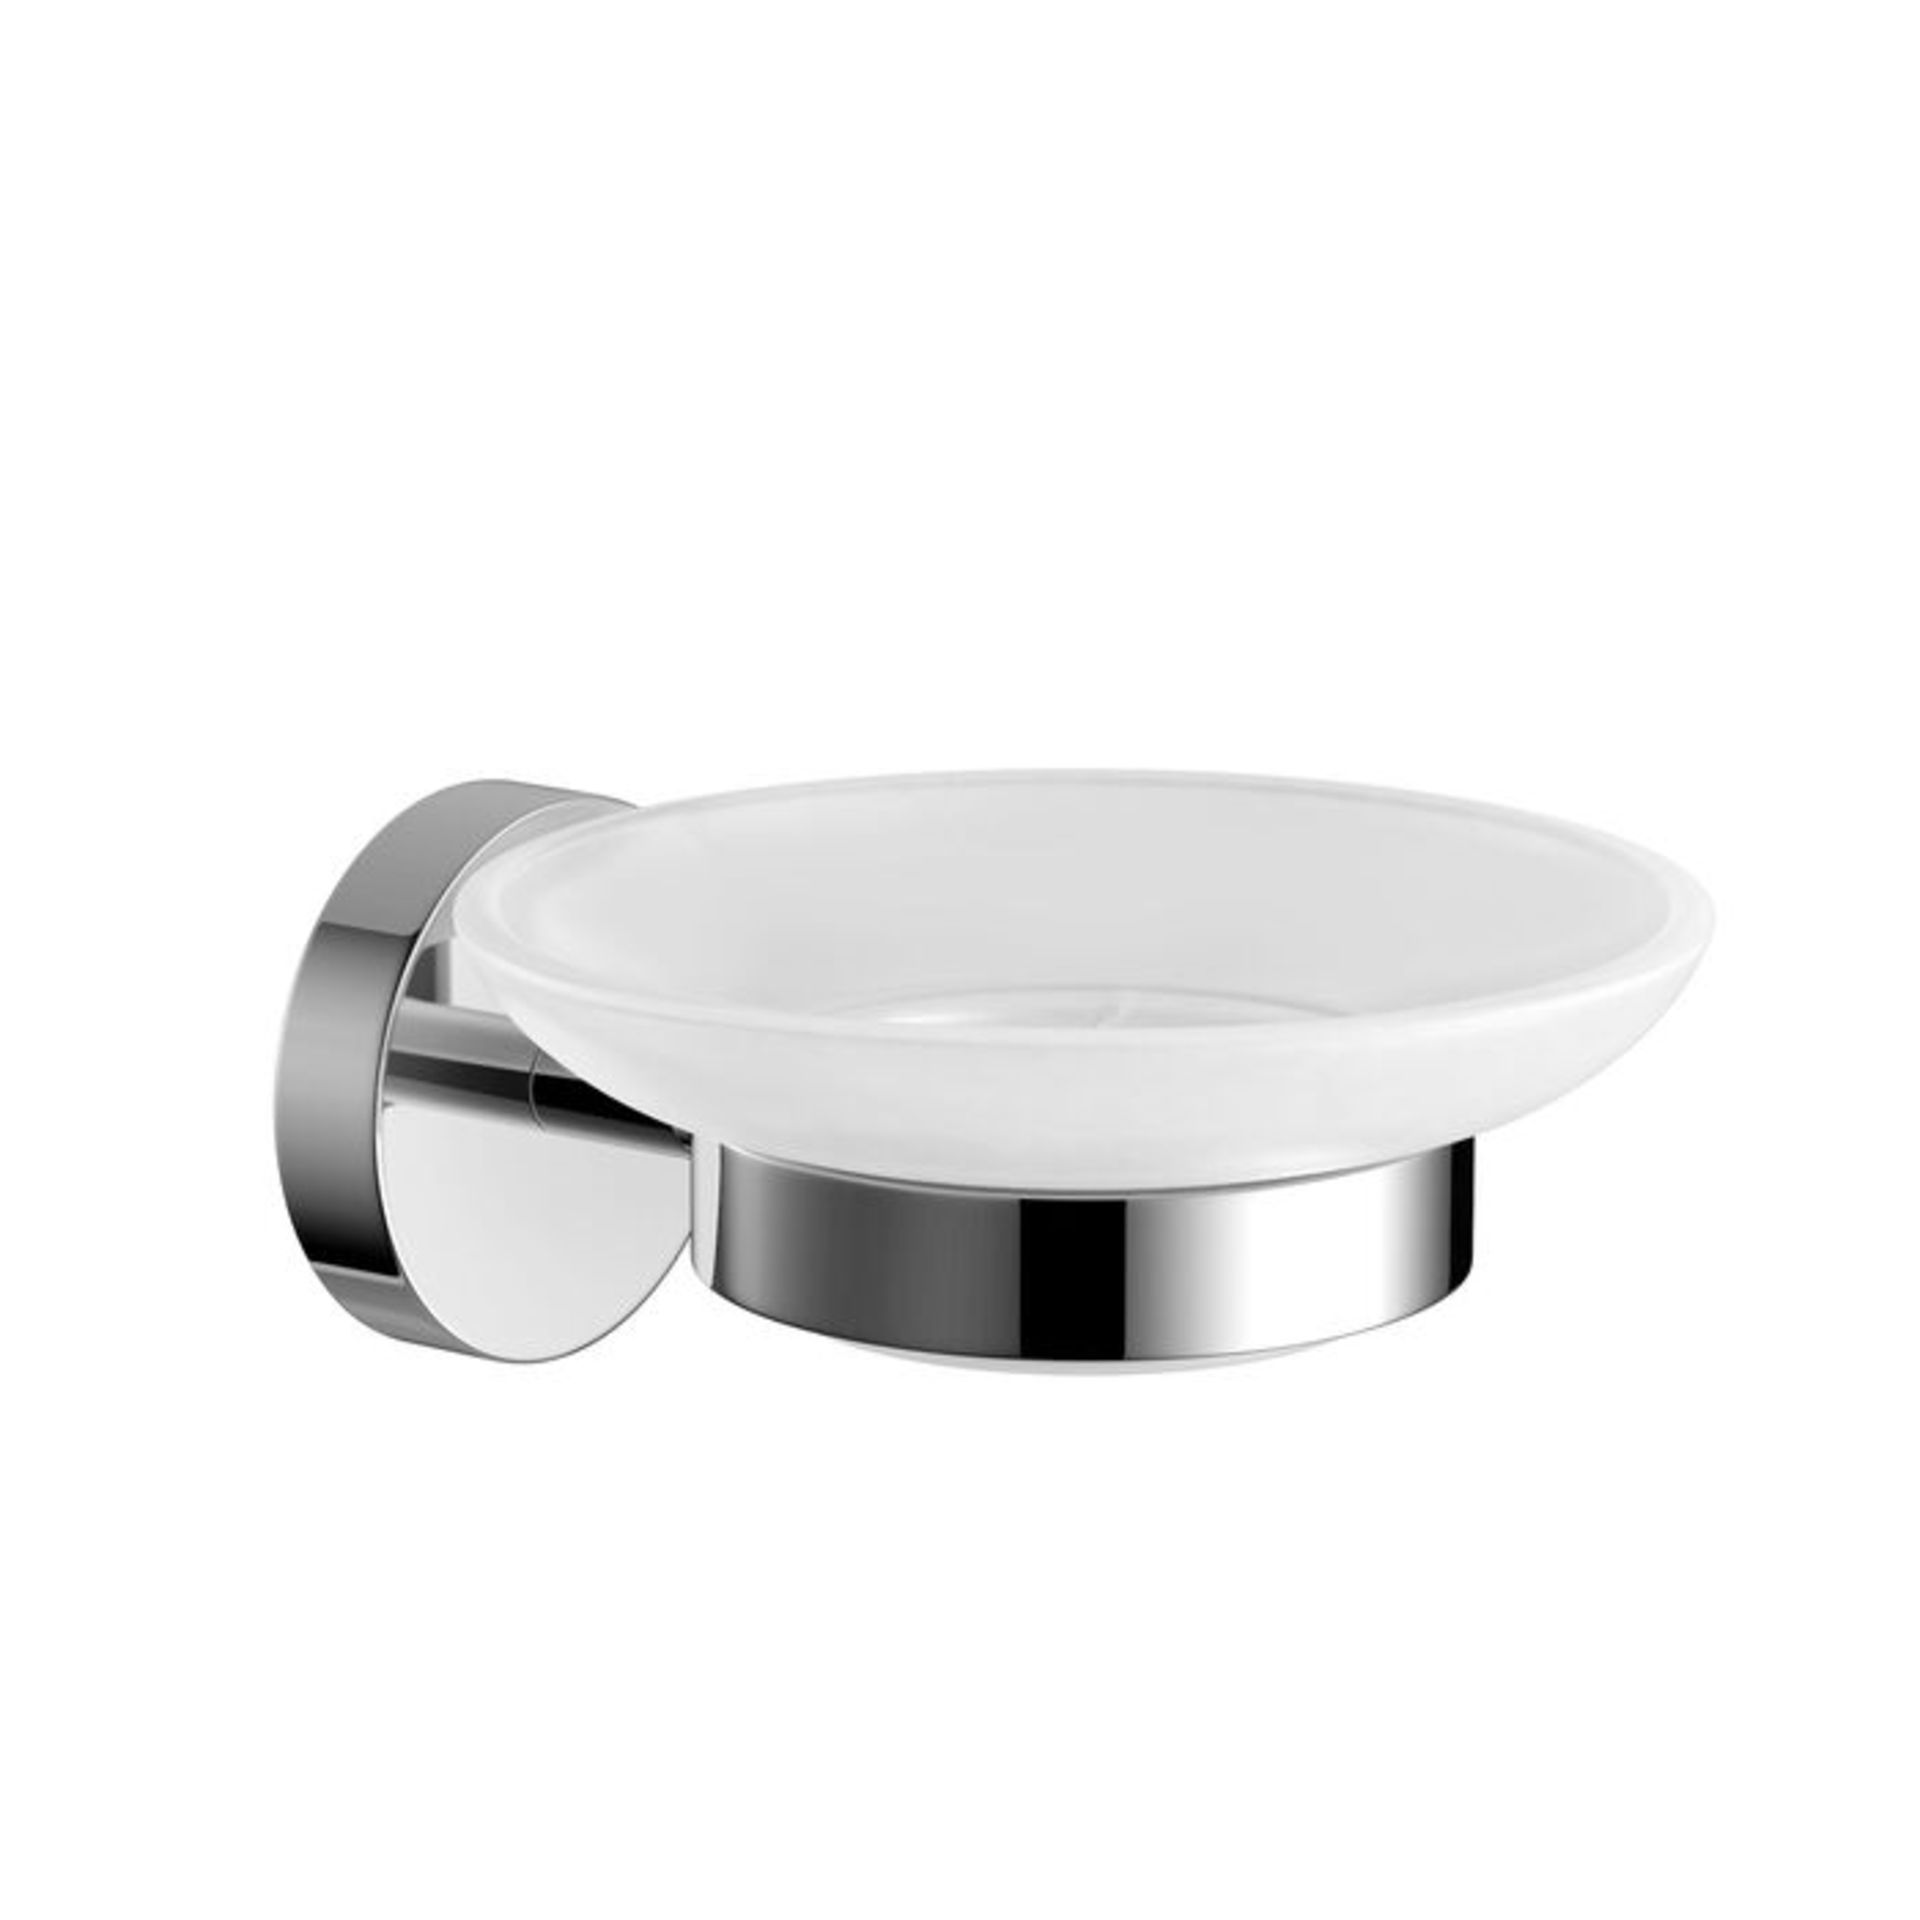 (AA1006) Finsbury Wall Mounted Soap Dish. Completes your bathroom with a little extra function... - Image 2 of 3